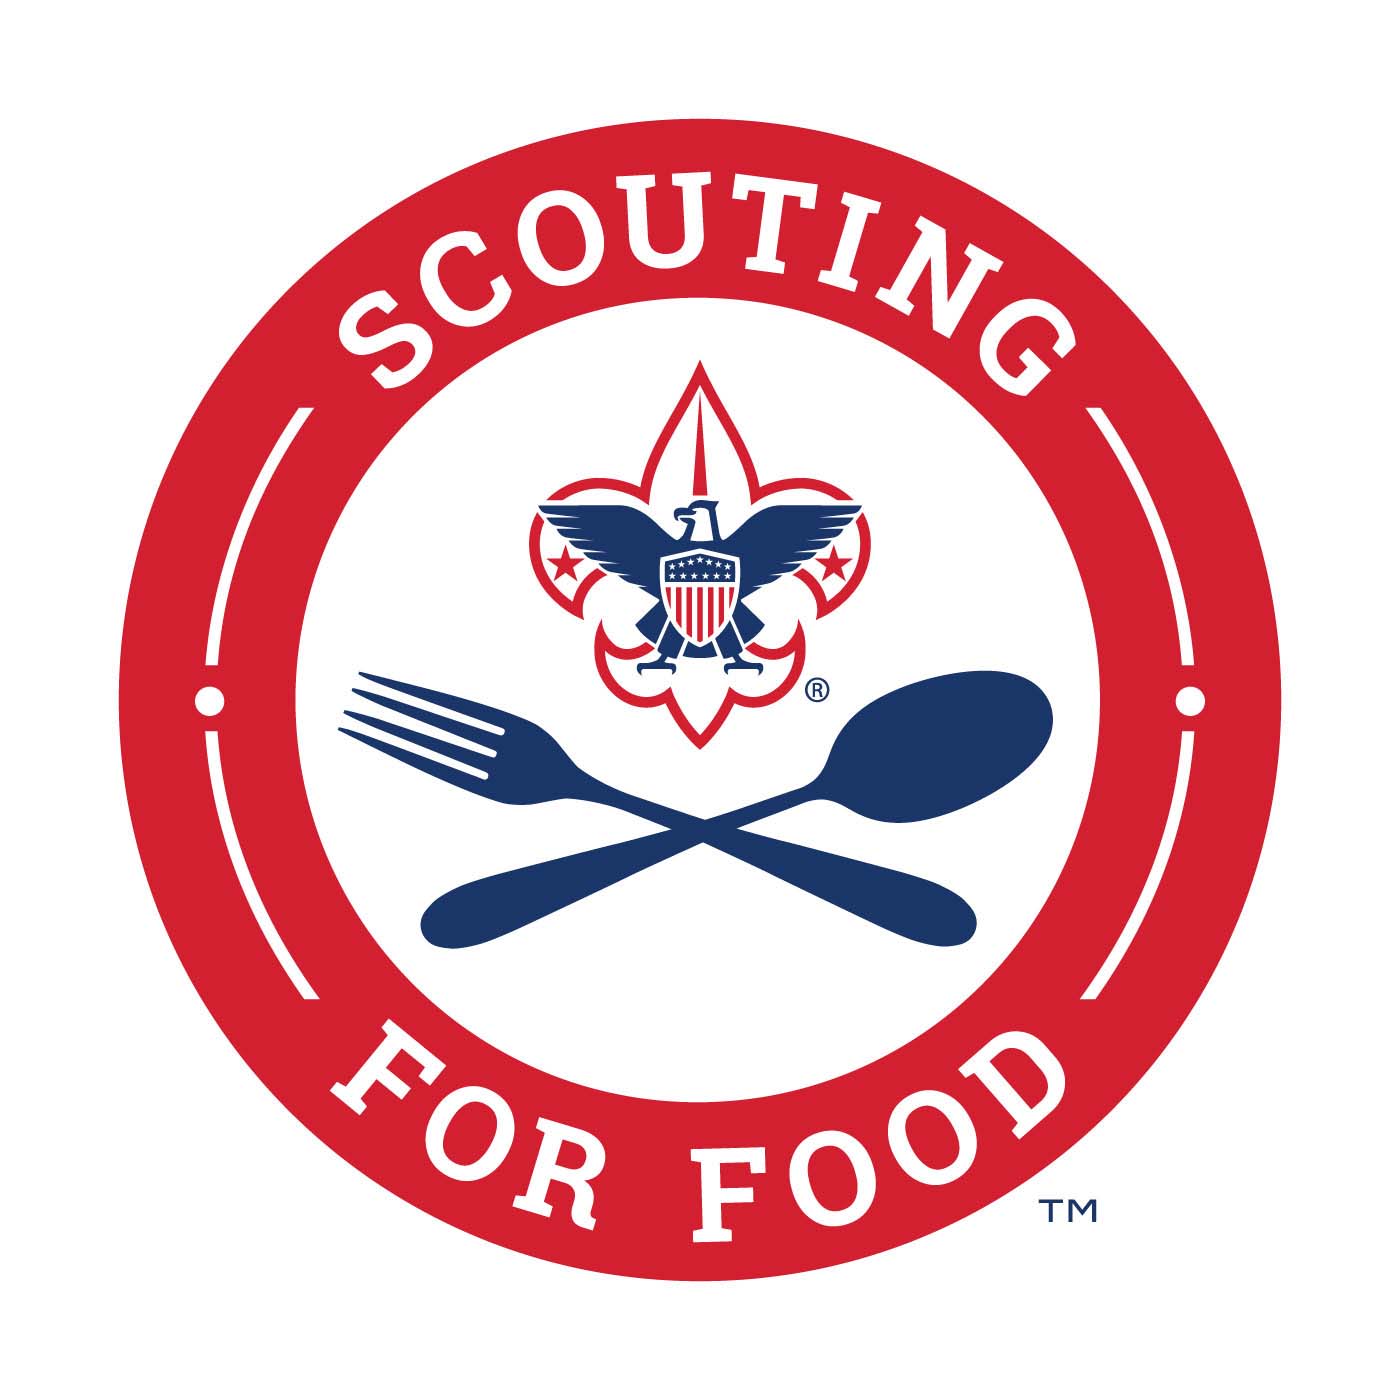 Scouting for Food Donations